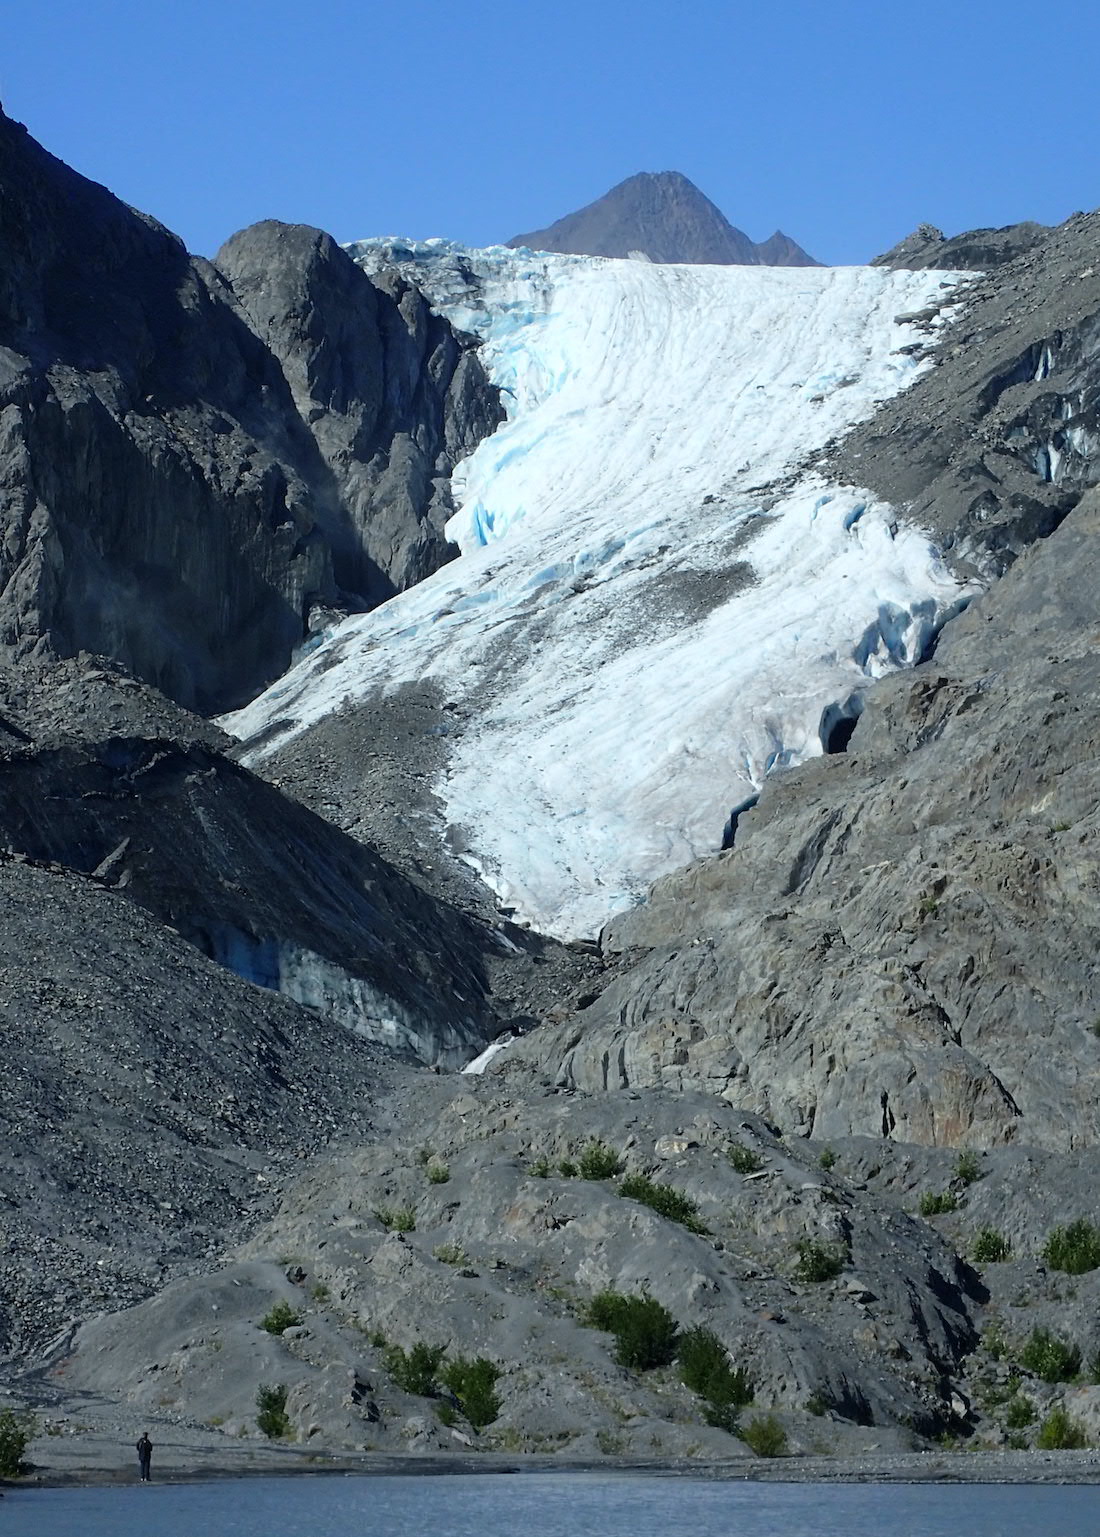 A glacier fills a valley between gray rocky slopes. A person stands in the foreground on the shore of a lake.